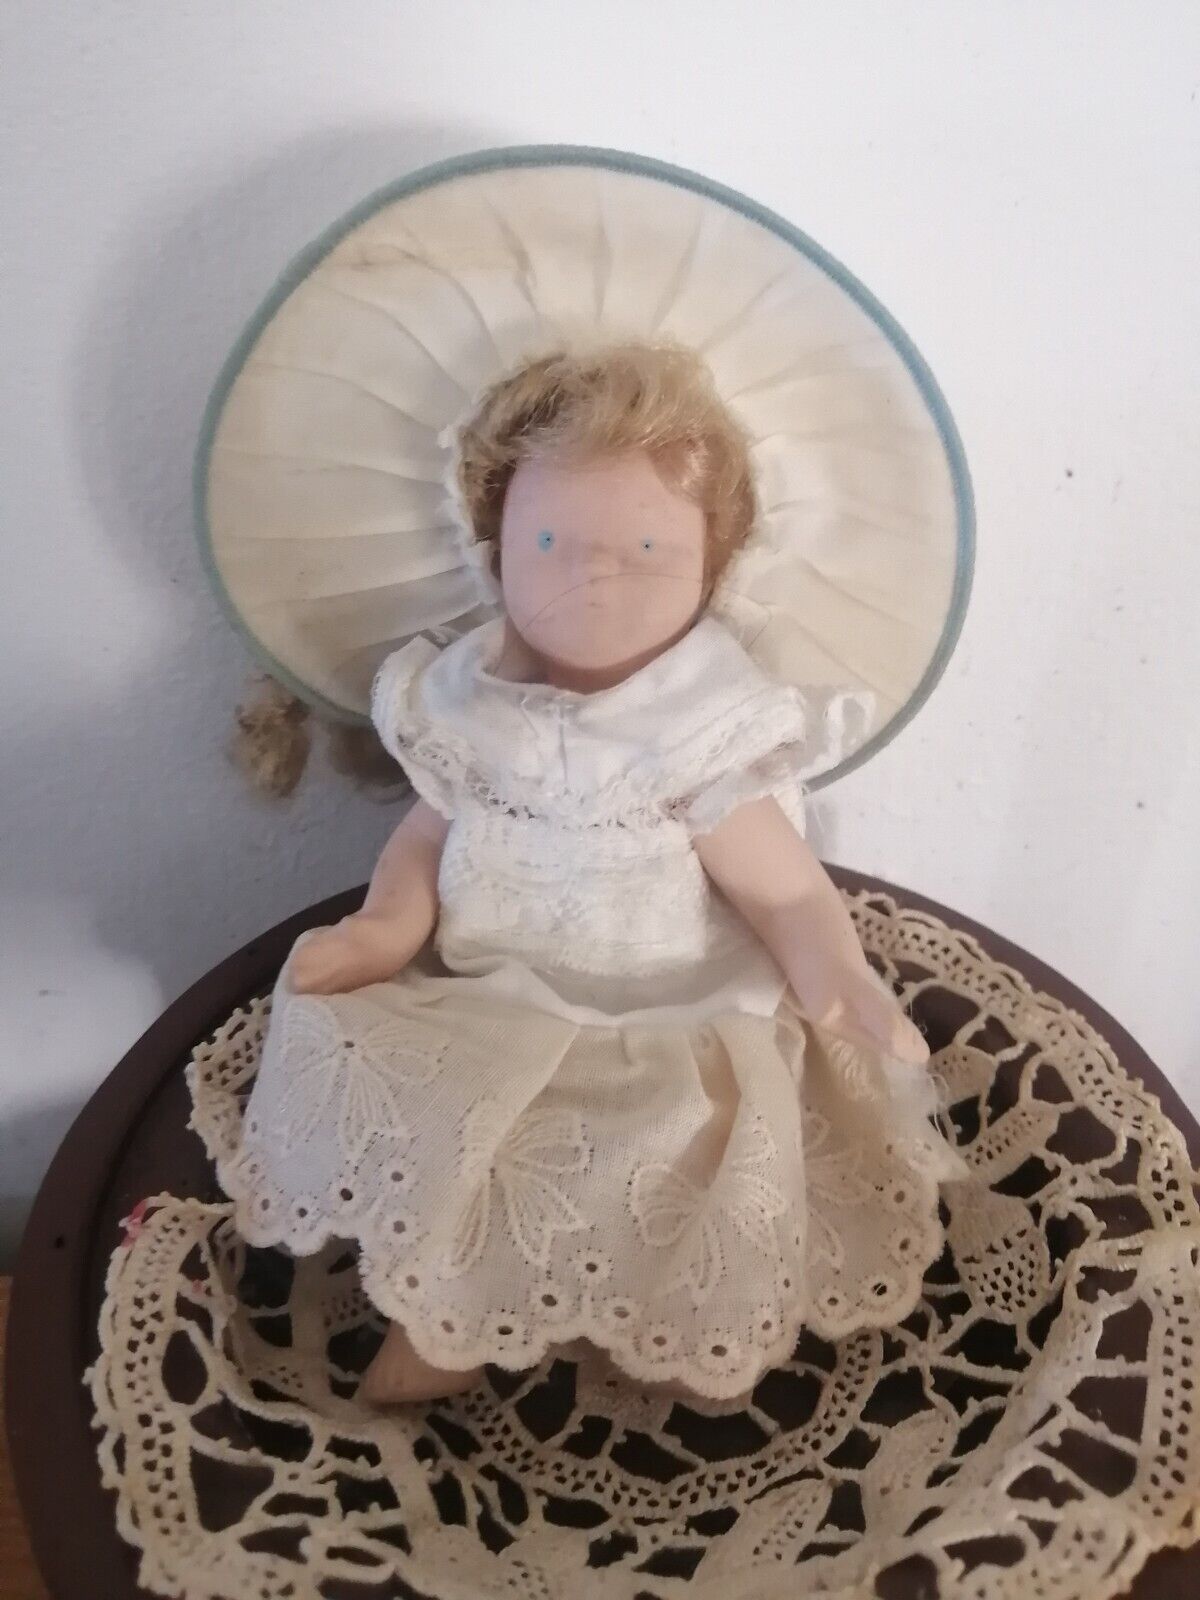 Small Haunted Antique Doll, Negative Entity, Not A Toy